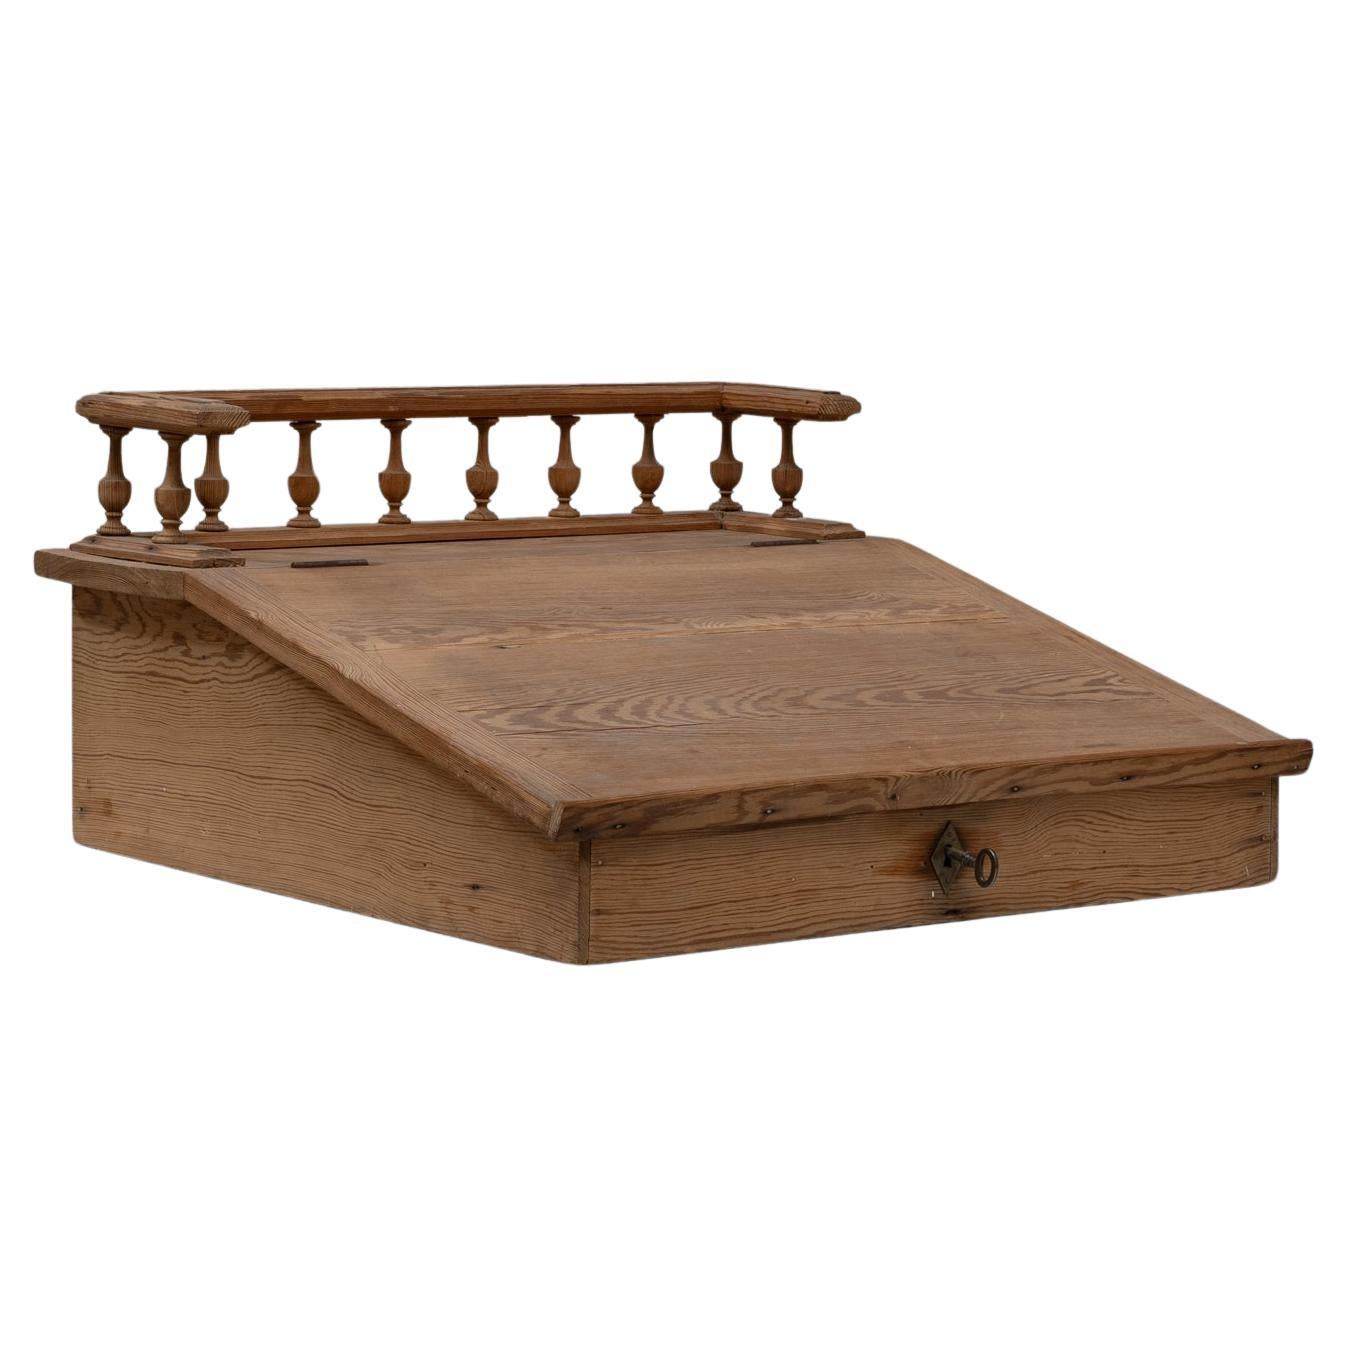 19th Century French Wooden Desk Organizer For Sale